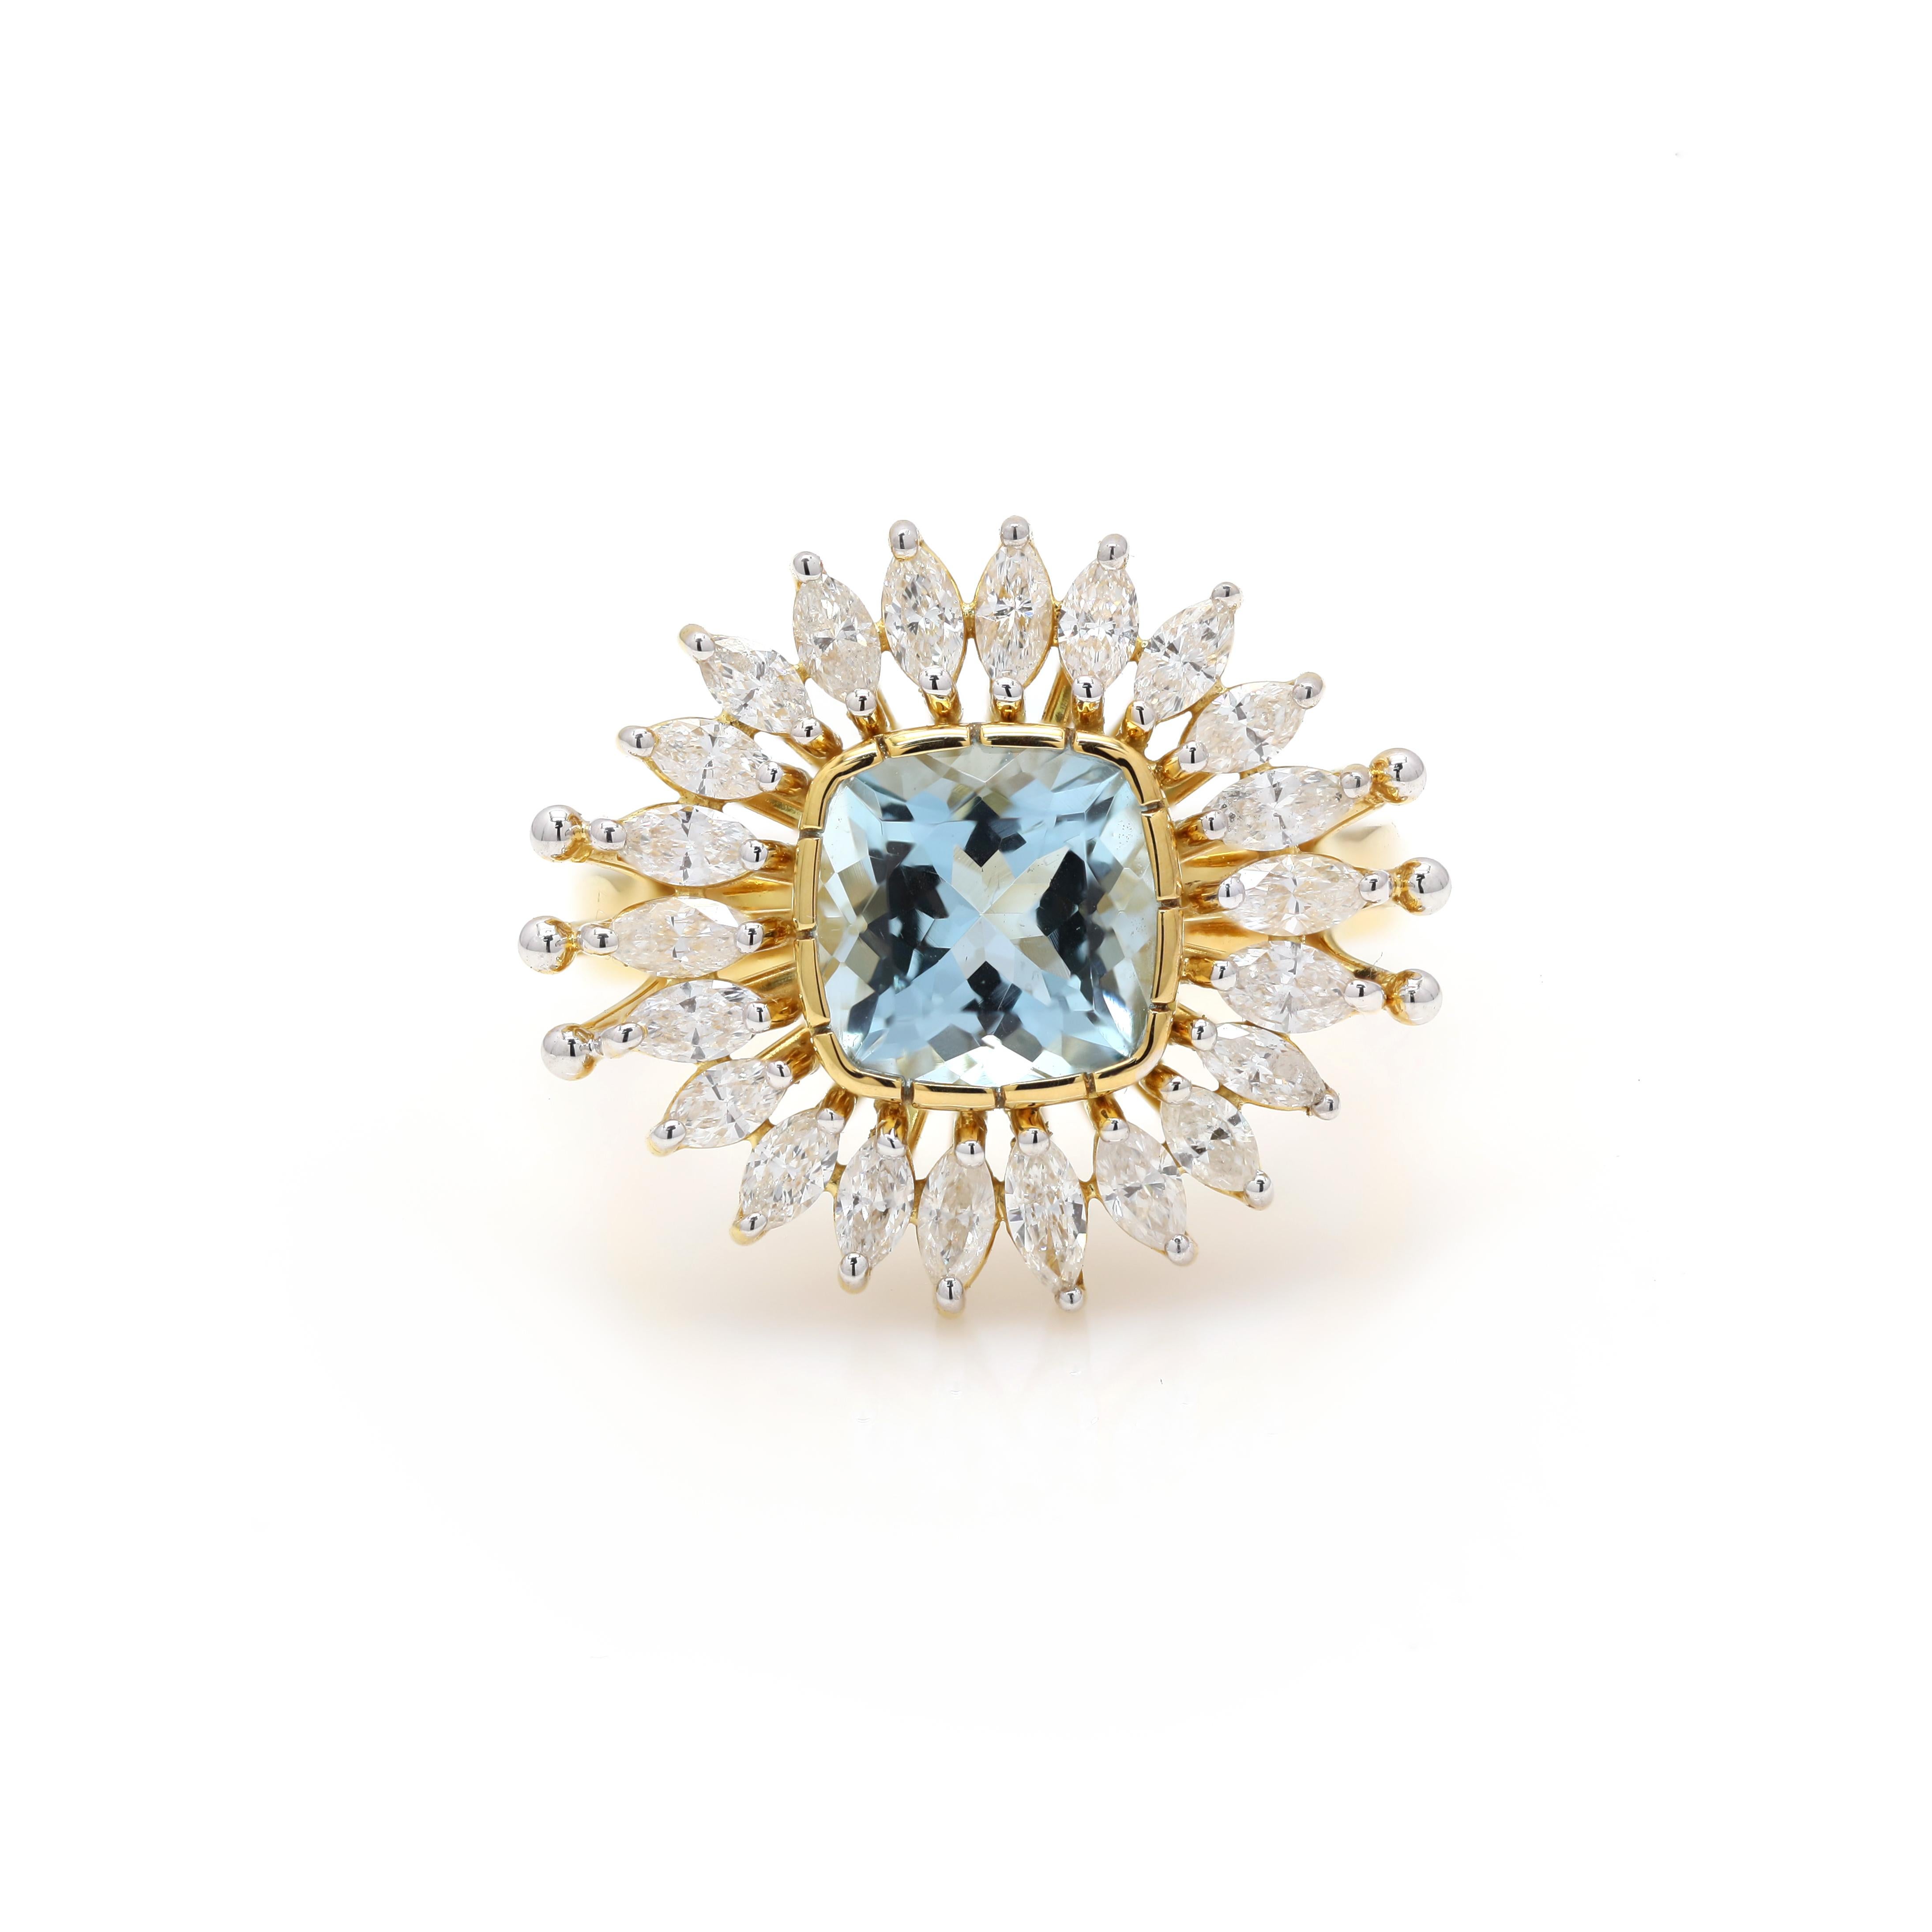 For Sale:   1.25 ct Diamond 3.6 ct Aquamarine Cocktail Ring in 18K Yellow Gold 3